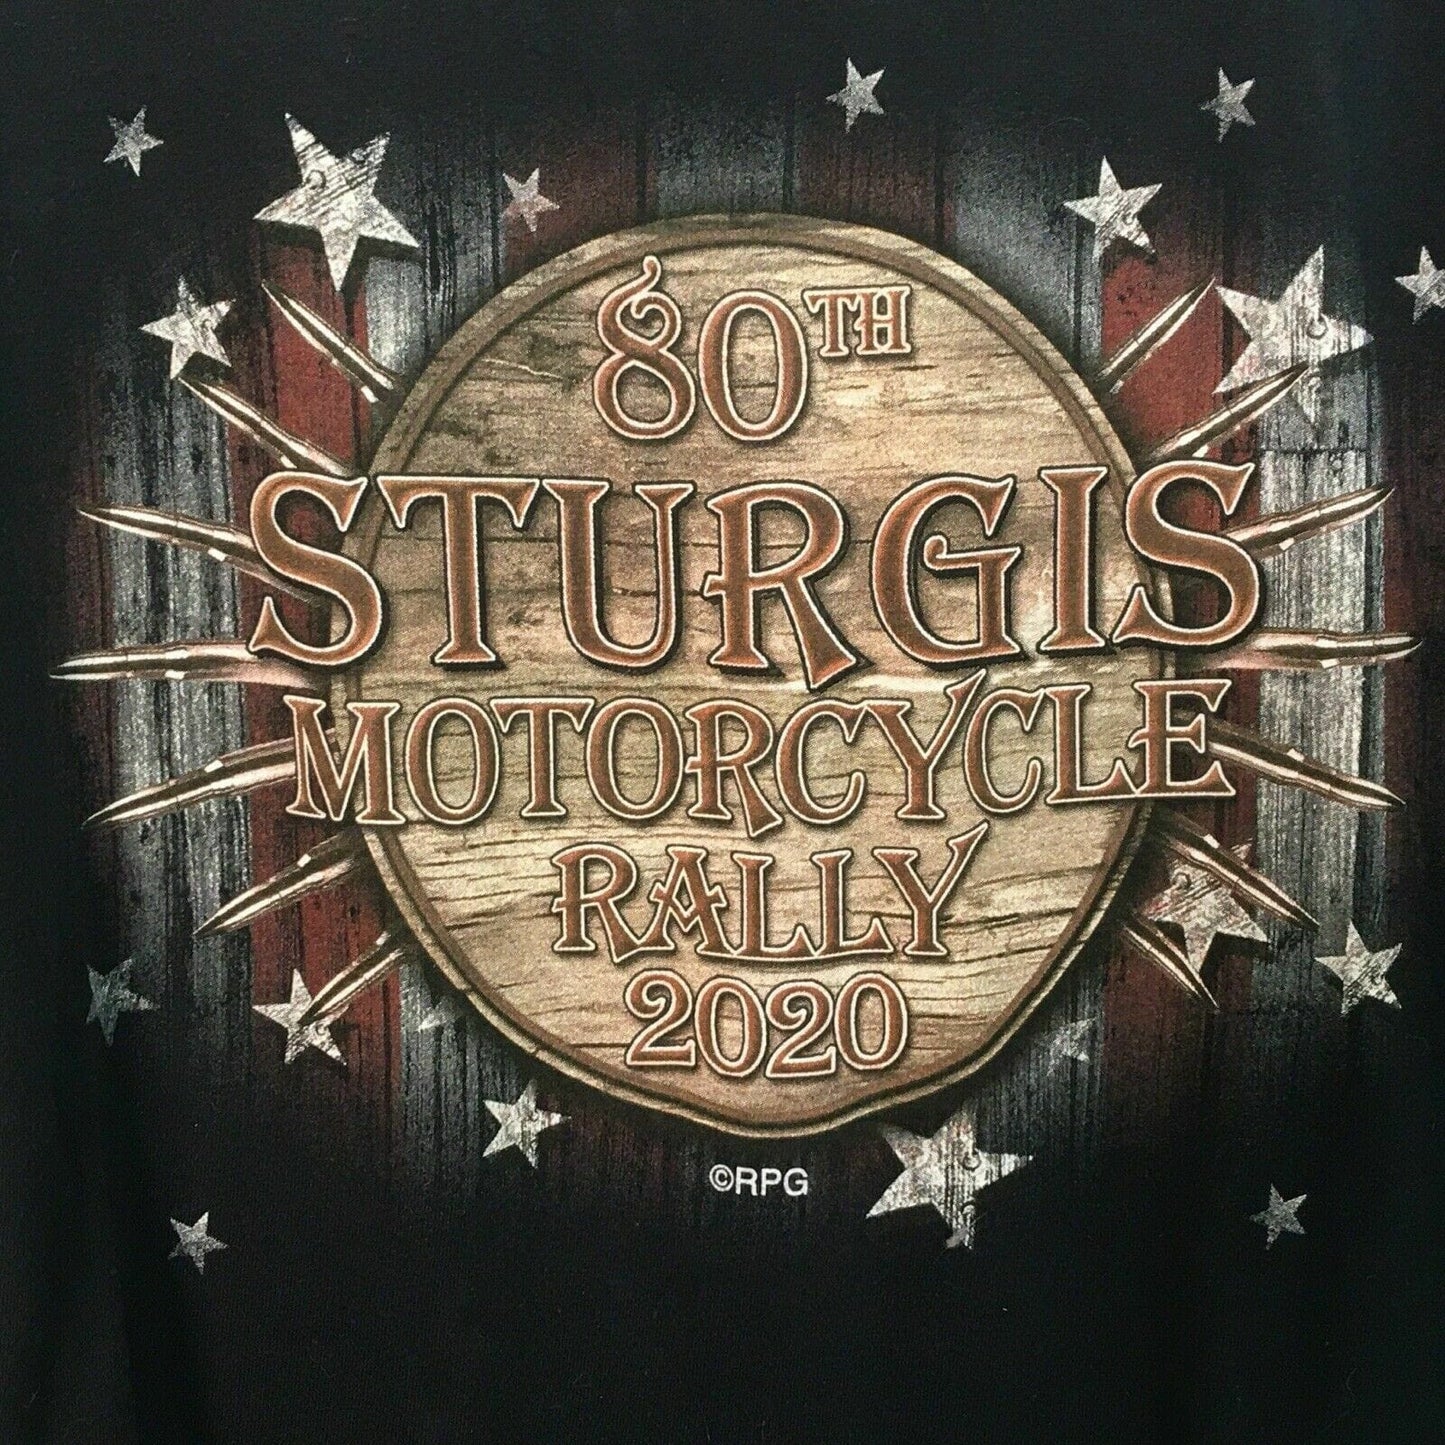 80th Sturgis Motorcycle Rally 2020 Mens Size L T-Shirt Black Graphic S/s